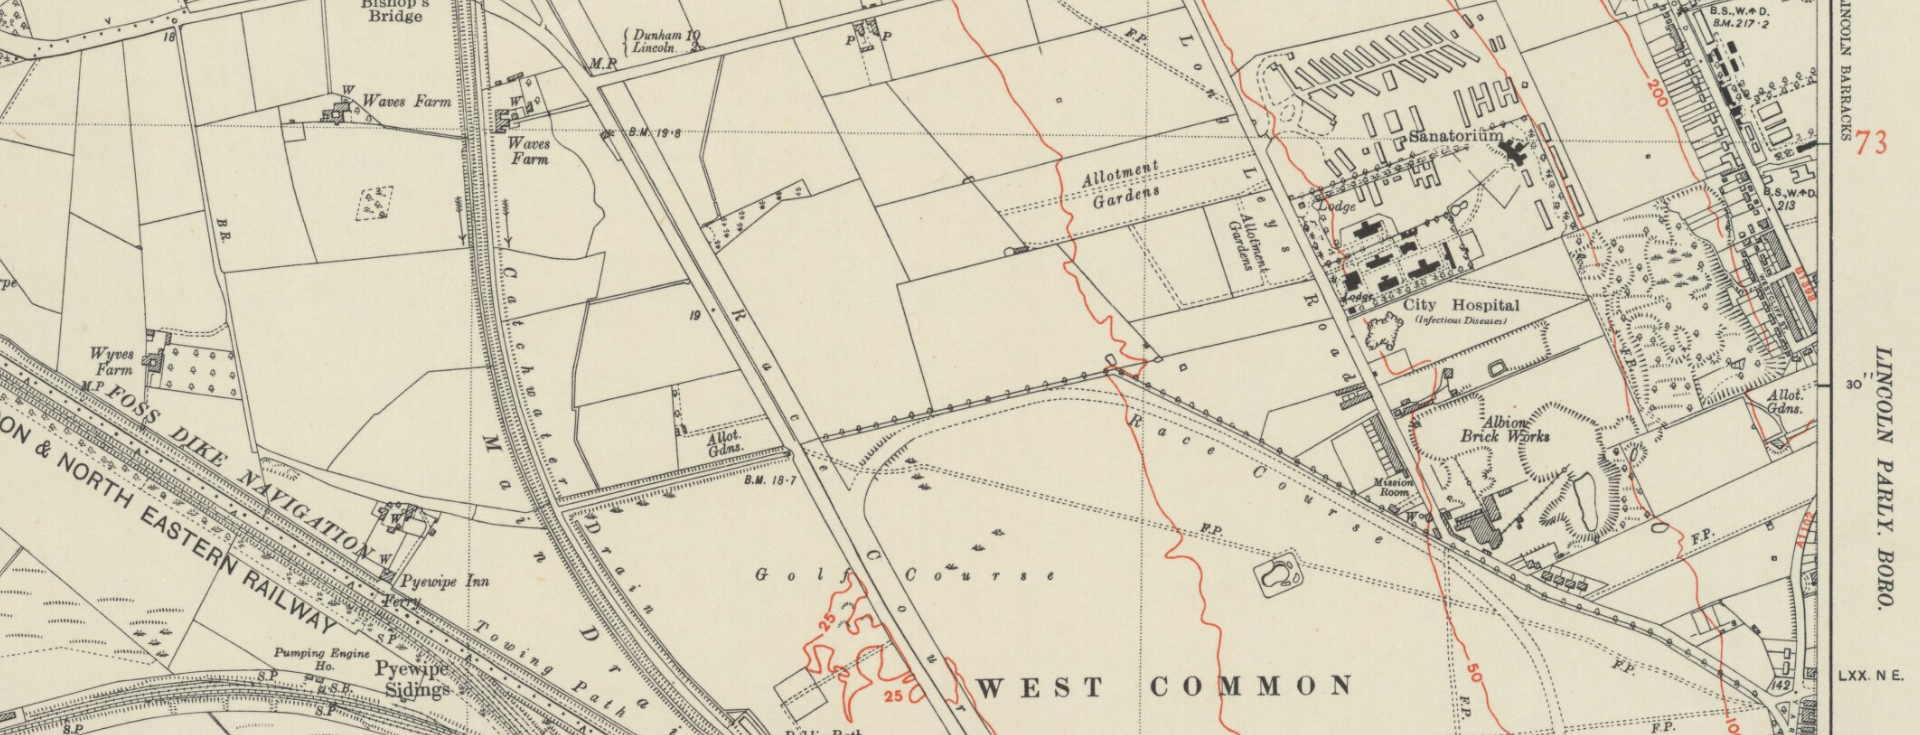 1948 map of Long Leys L:incoln